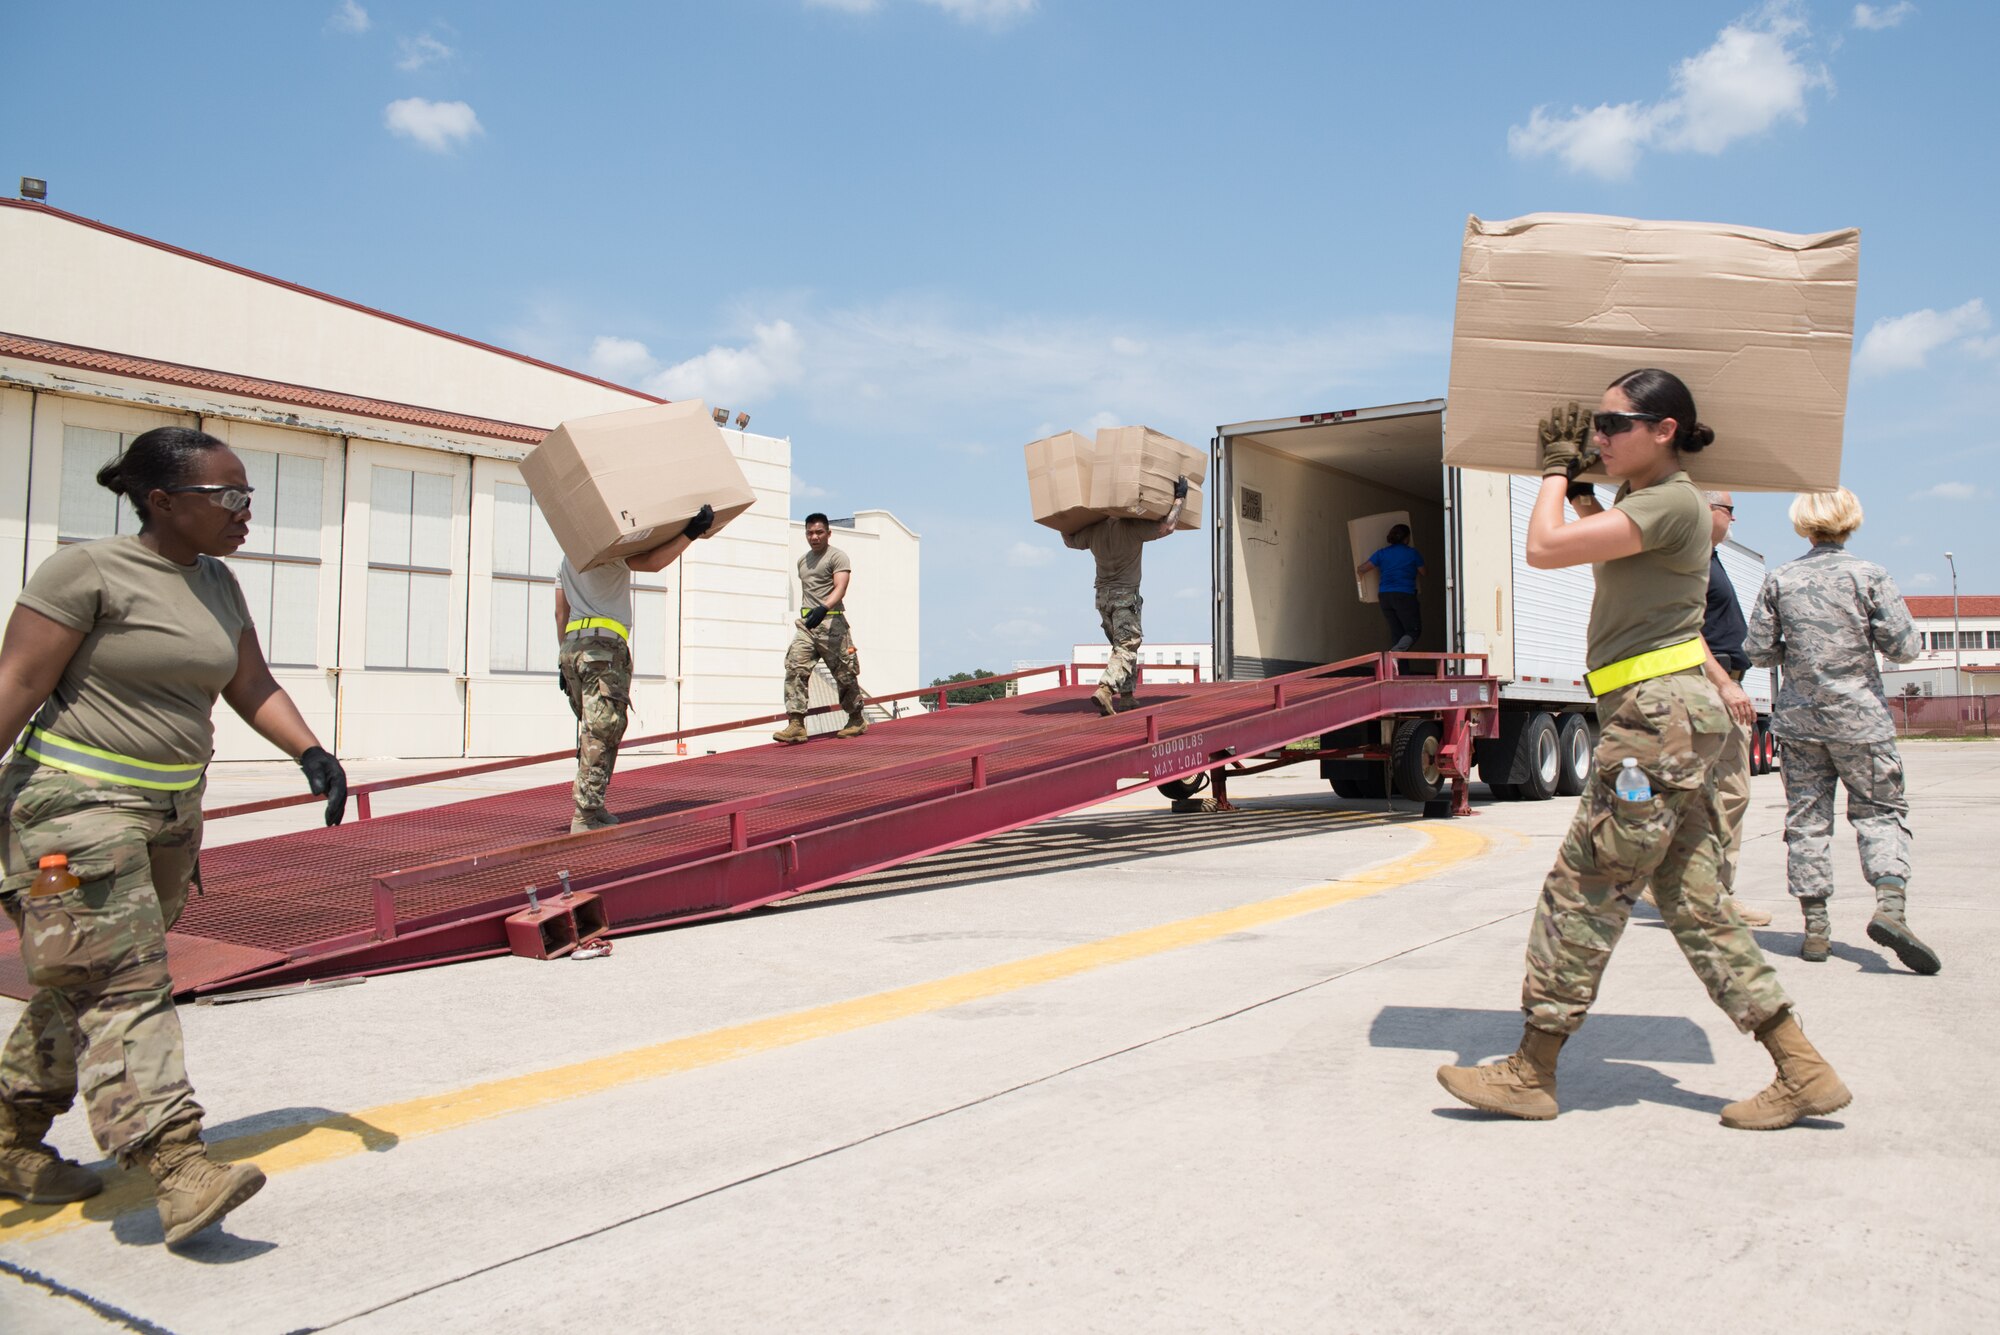 Members with 502nd Logistics Readiness Squadron and U.S. Army Soldiers unload a Royal Canadian Air Force CC-130J Hercules at Joint Base San Antonio-Lackland Kelly Field, Texas carrying humanitarian supplies from the government of Canada to aid in Hurricane Harvey relief efforts Sept. 3, 2017. The supplies included pediatric necessities like baby formula, blankets, cribs and other similar items. The RCAF airlift flew in from 8 Wing Trenton, Ontario, Canada.